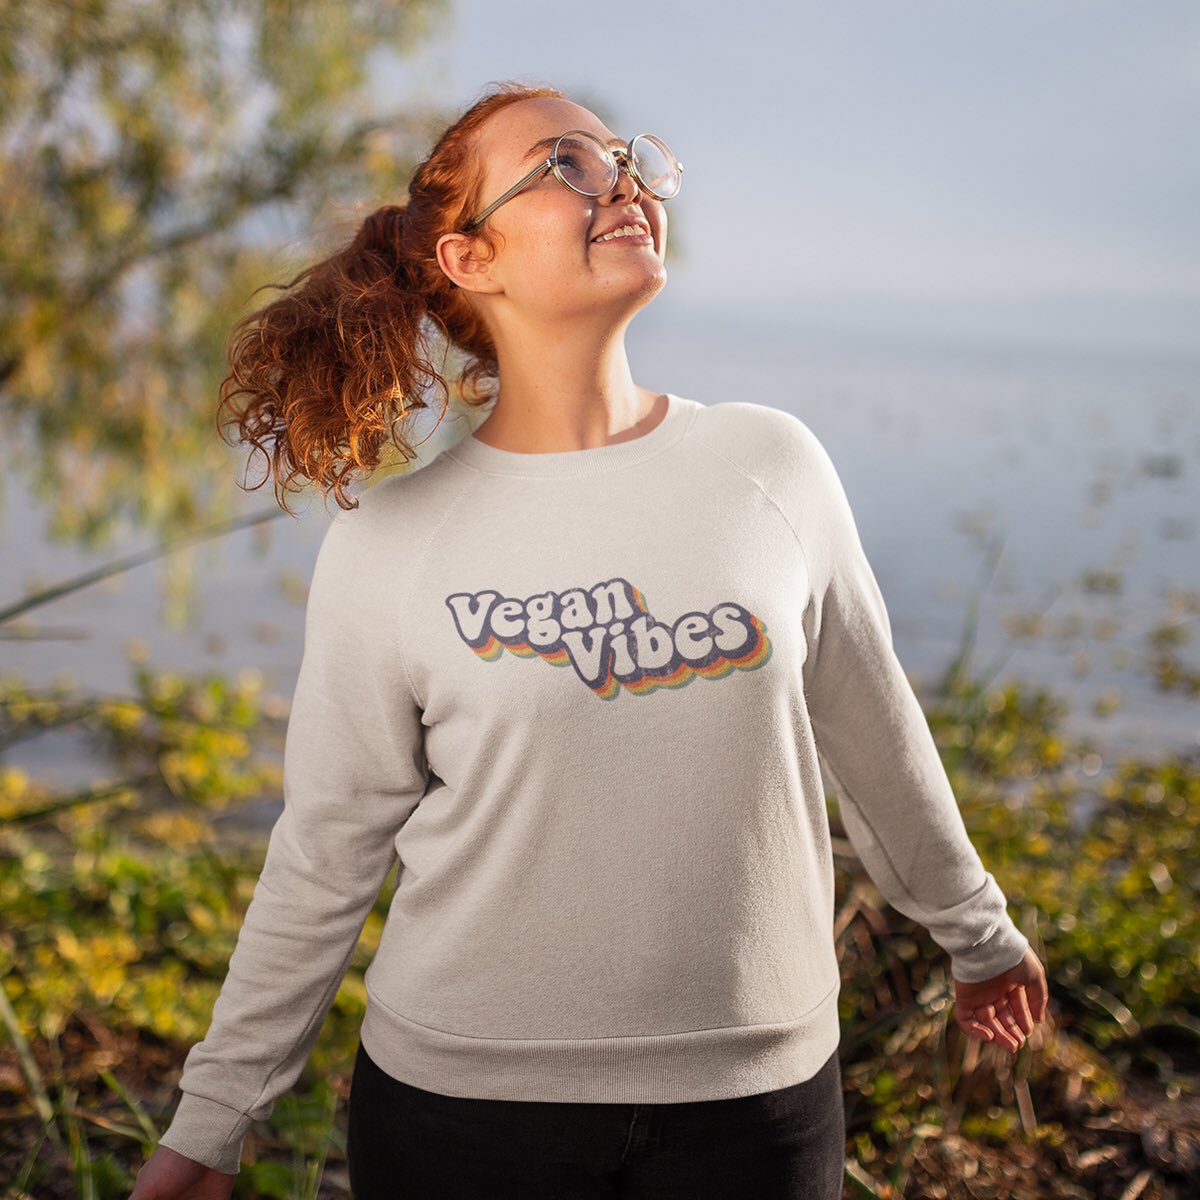 Here’s one of our new printed sweatshirts. 

Available now from our website £35 

Show the world you are proud! #Vegan #VeganVibes #VeganFashion #VeganCompany #EcoFriendly